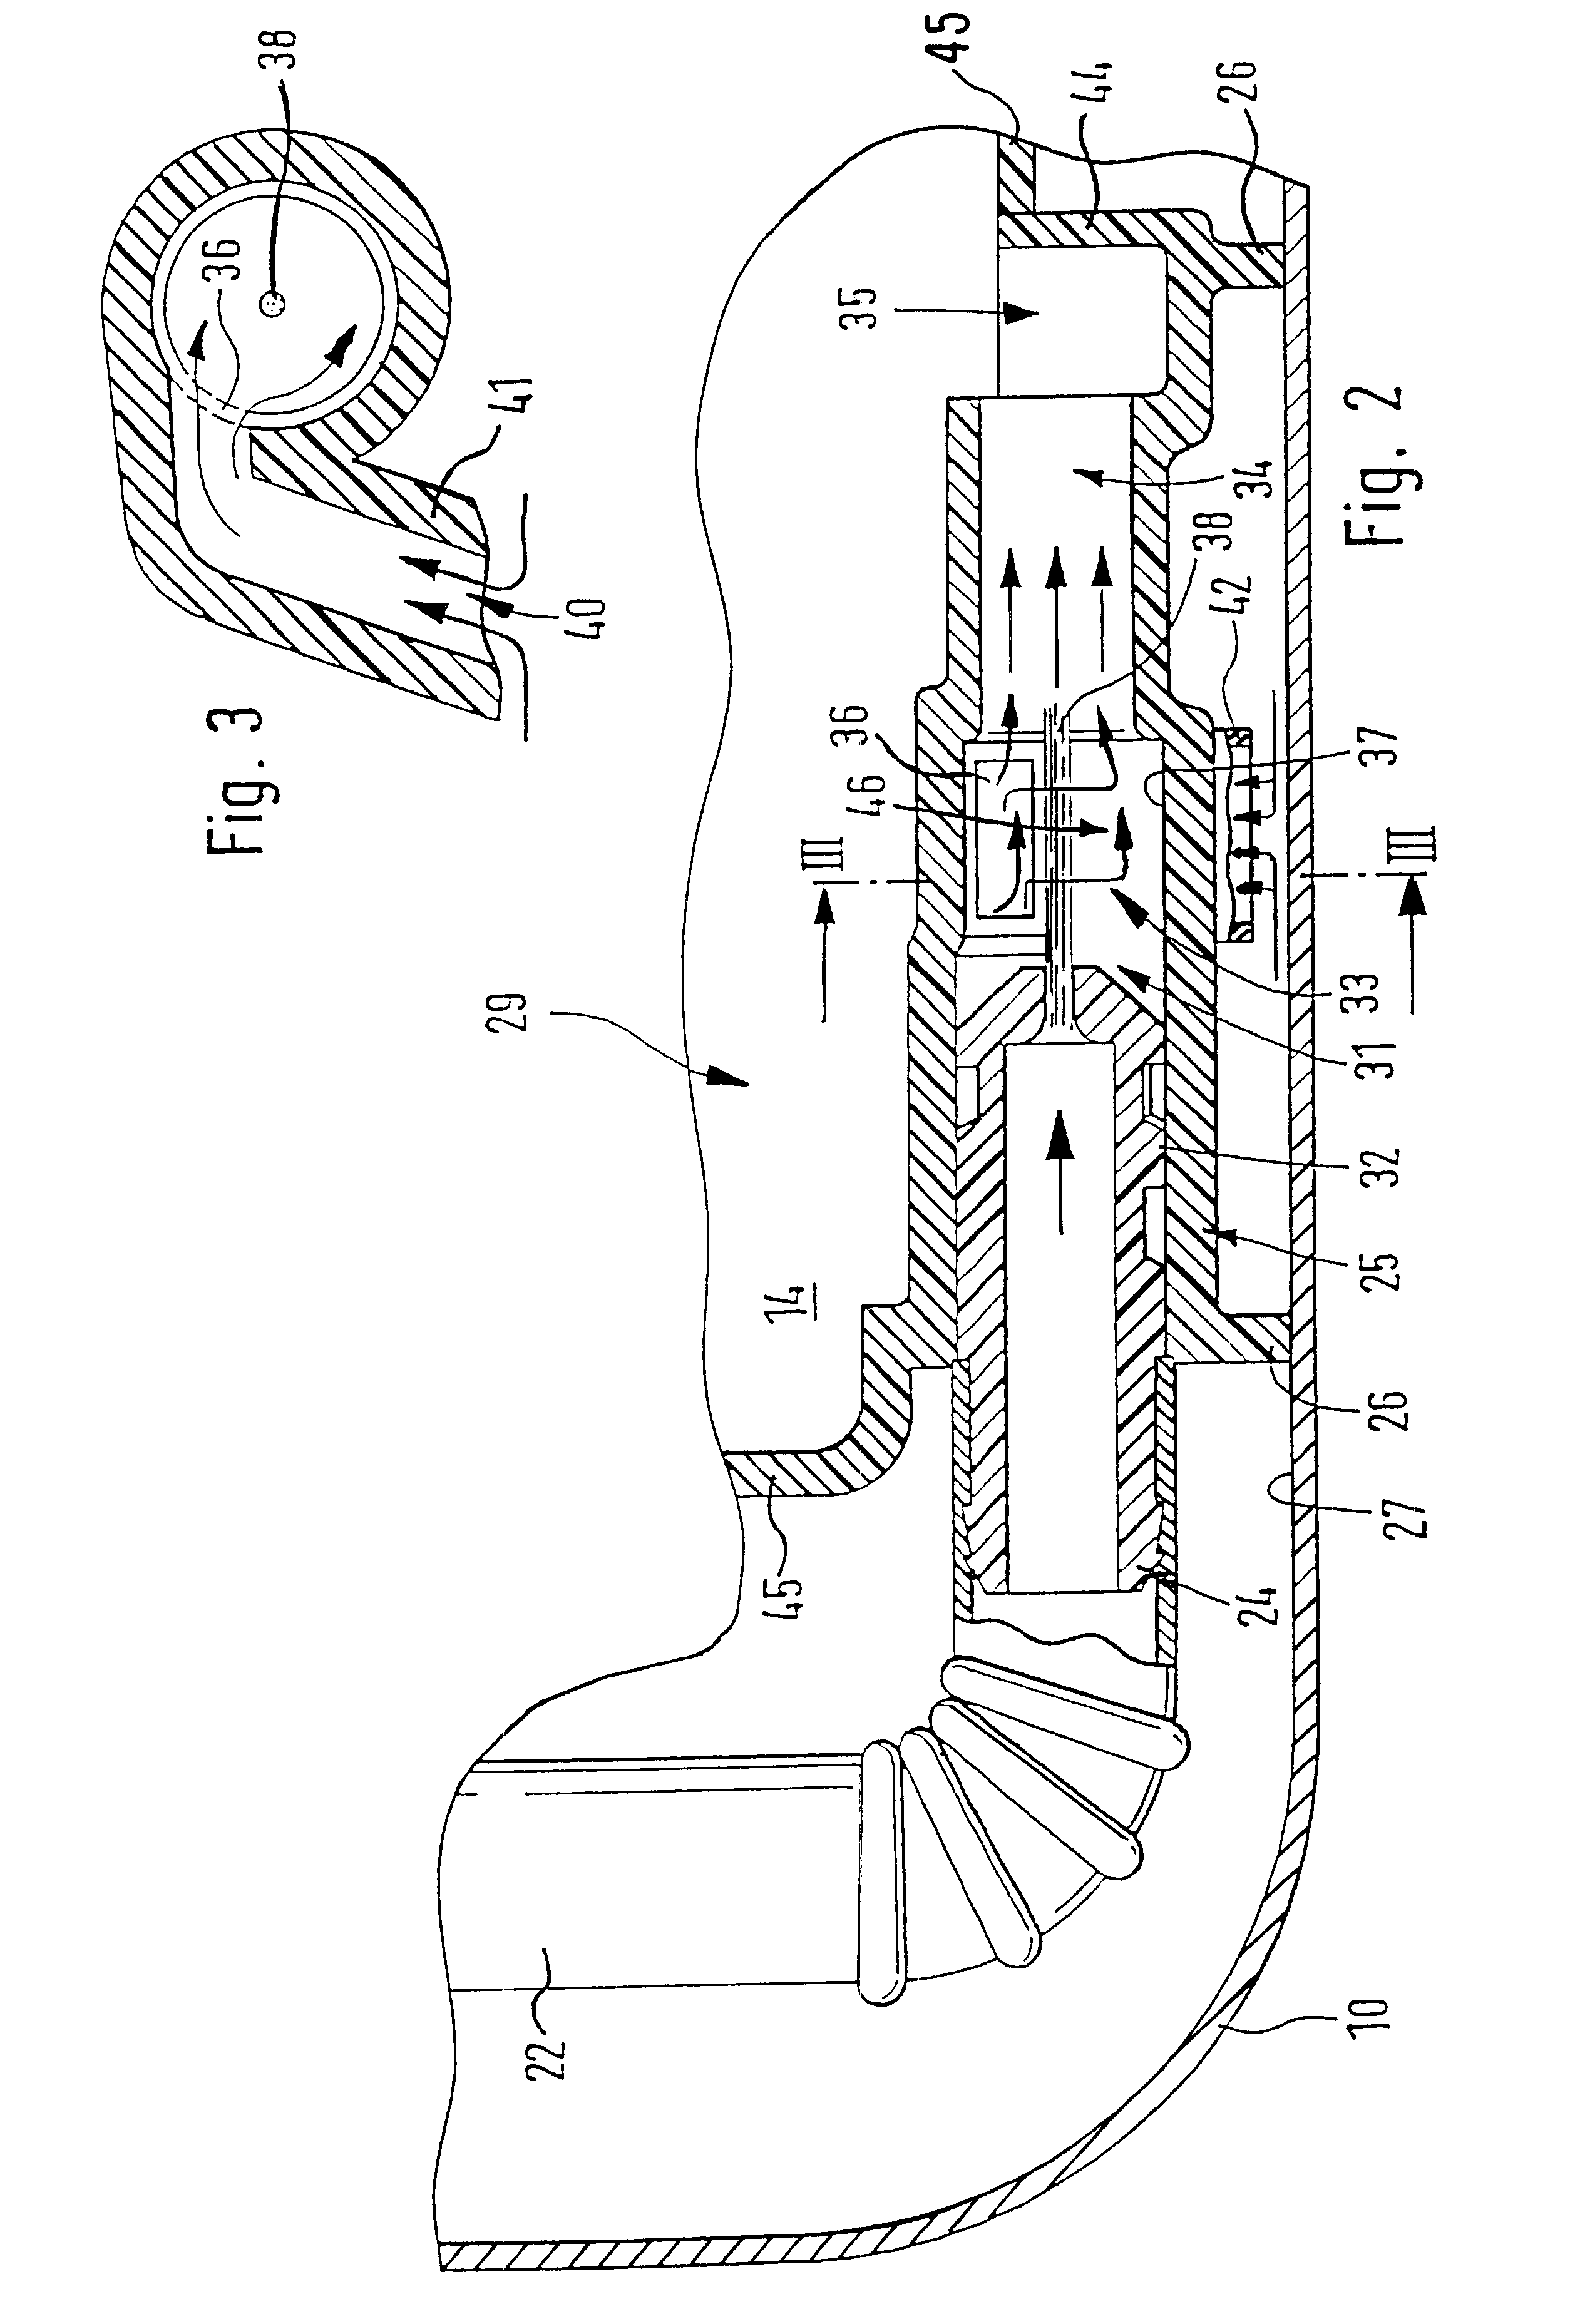 Device for delivering fuel from a storage tank to the internal combustion engine of a motor vehicle